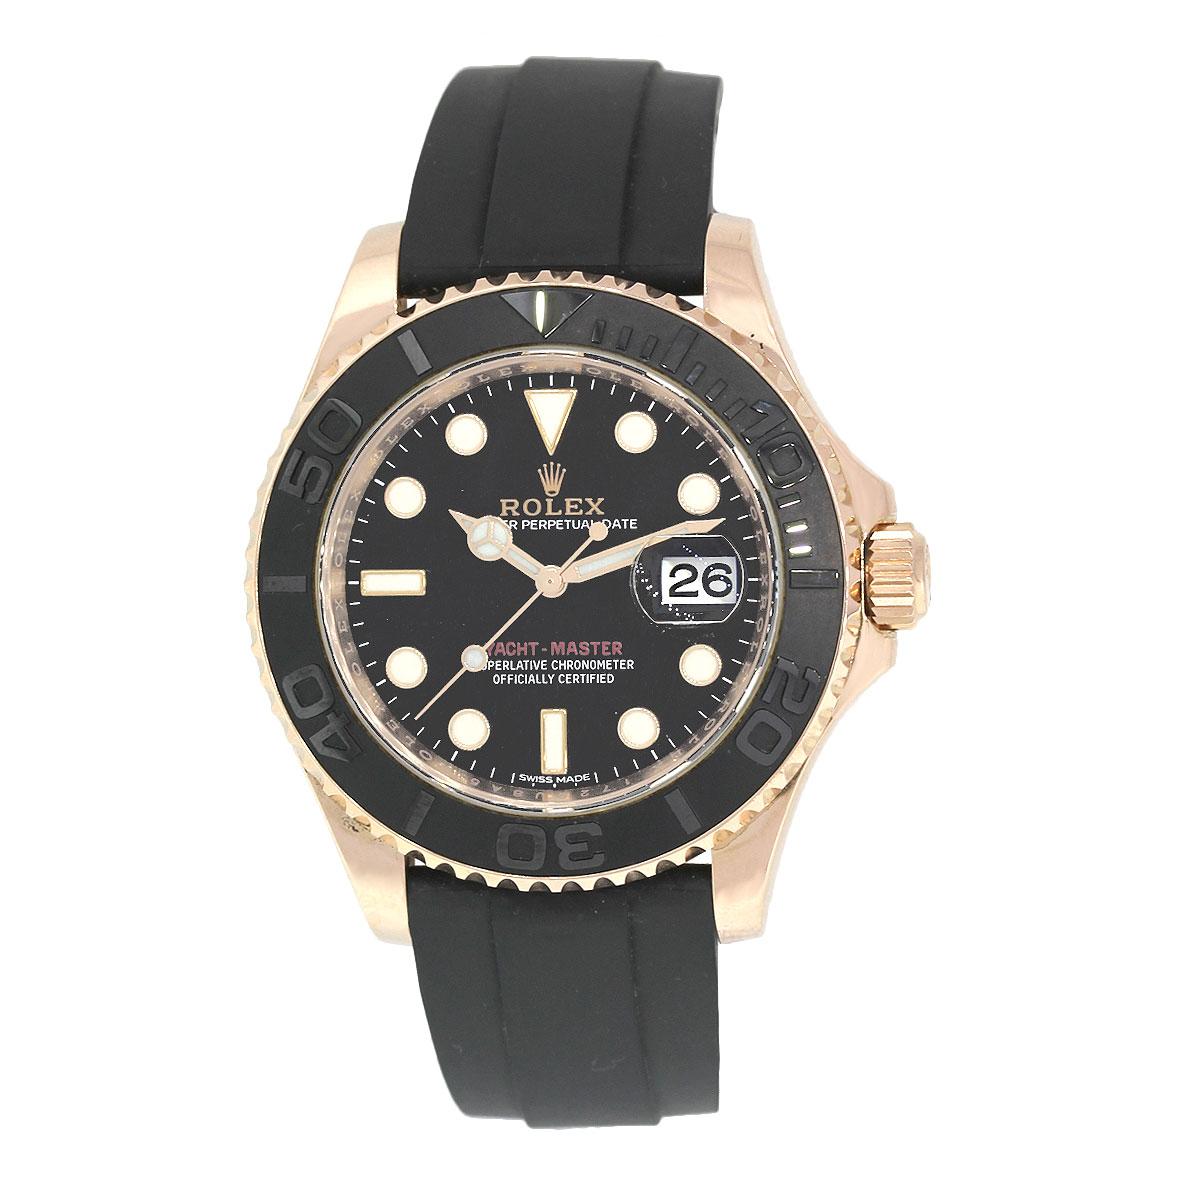 Brand: Rolex
MPN: 116655
Model: Yachtmaster
Case Material: 18k Rose Gold
Case Diameter: 40mm
Crystal: Sapphire crystal
Bezel: Black ceramic bezel
Dial: Black dial with luminescent hour markers. Date can be found at 3 o’Clock
Bracelet: Black rubber